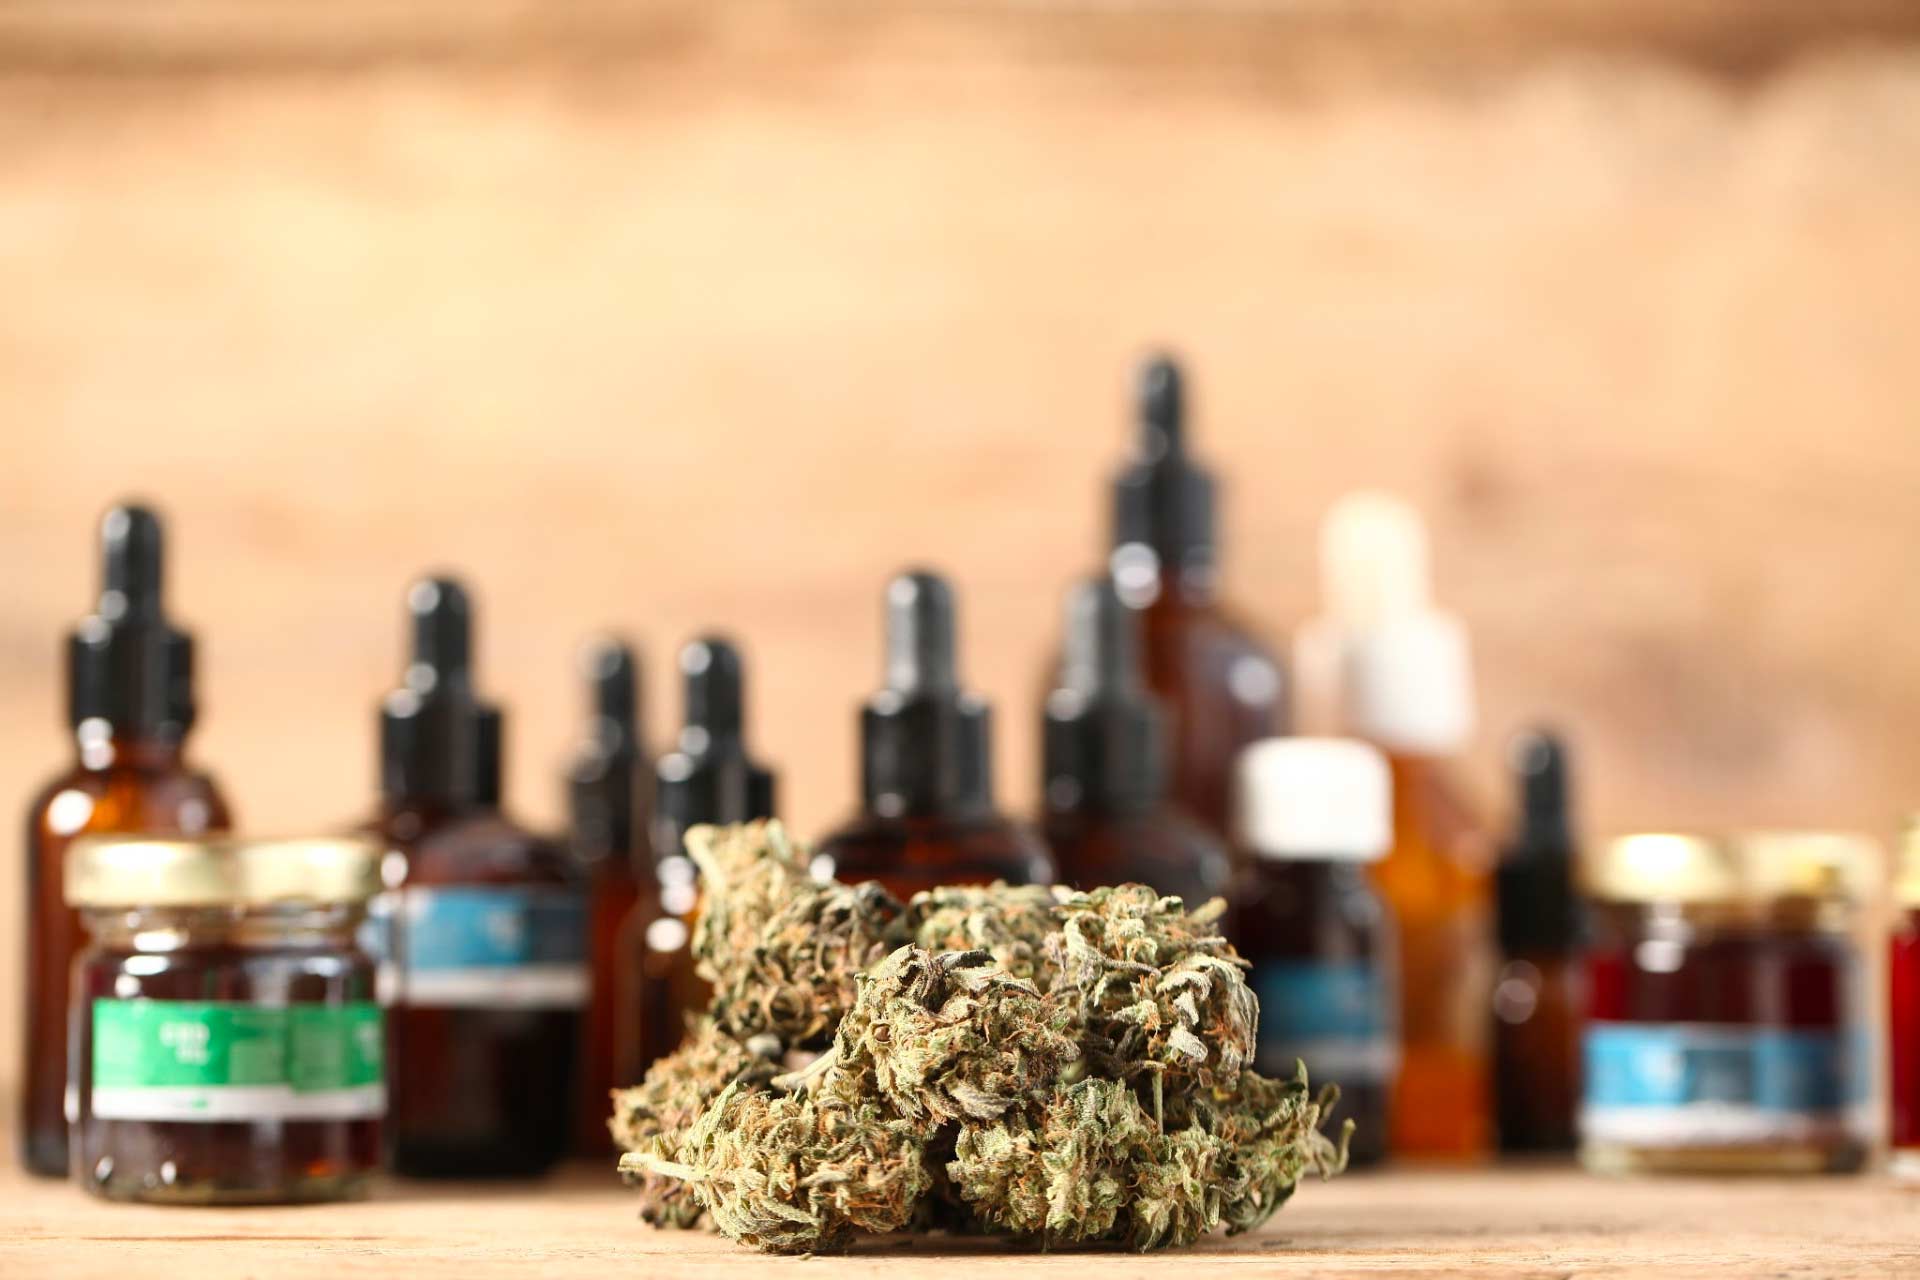 Various cannabis tinctures and other products, with cannabis flower (bud) in foreground.